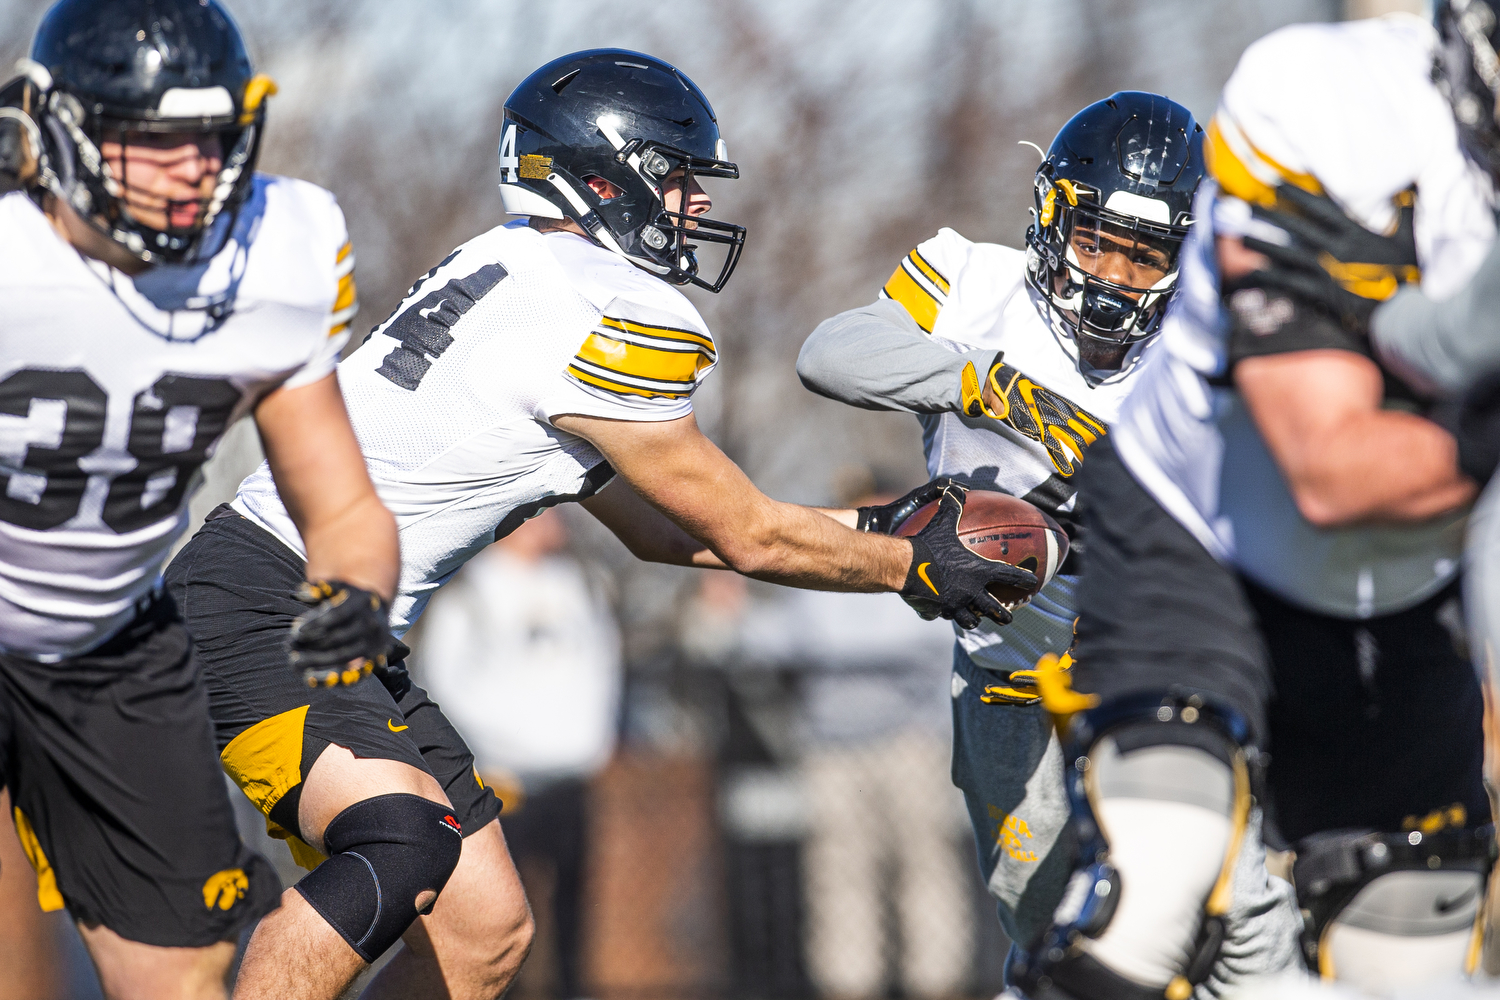 Iowa TE Sam LaPorta practiced in an open practice on December 28, days before the Music City Bowl.